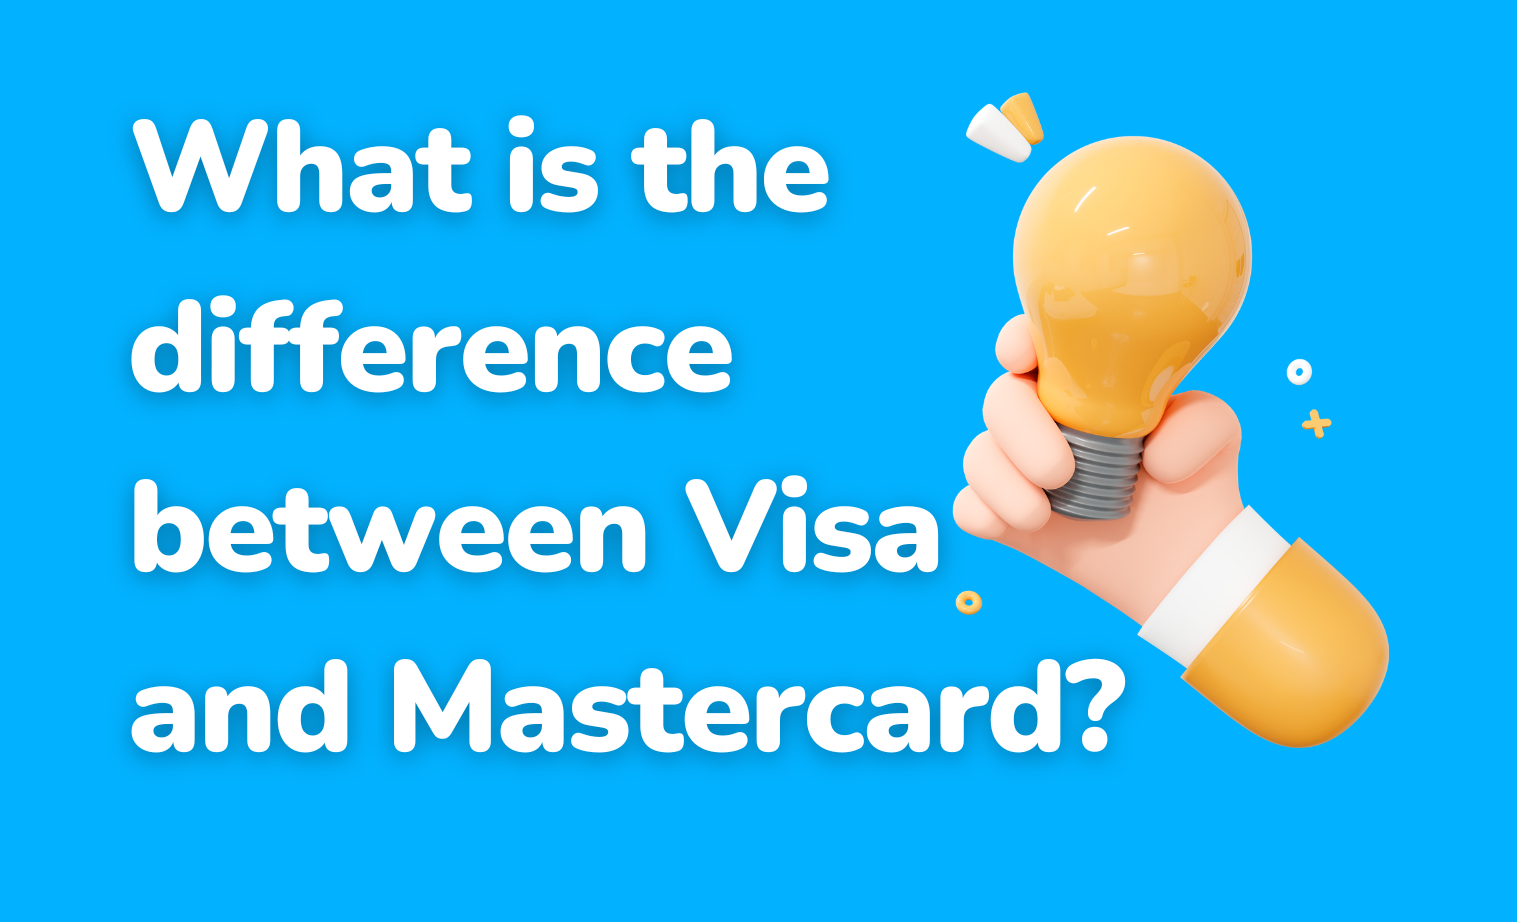 What is the difference between Visa and Mastercard?